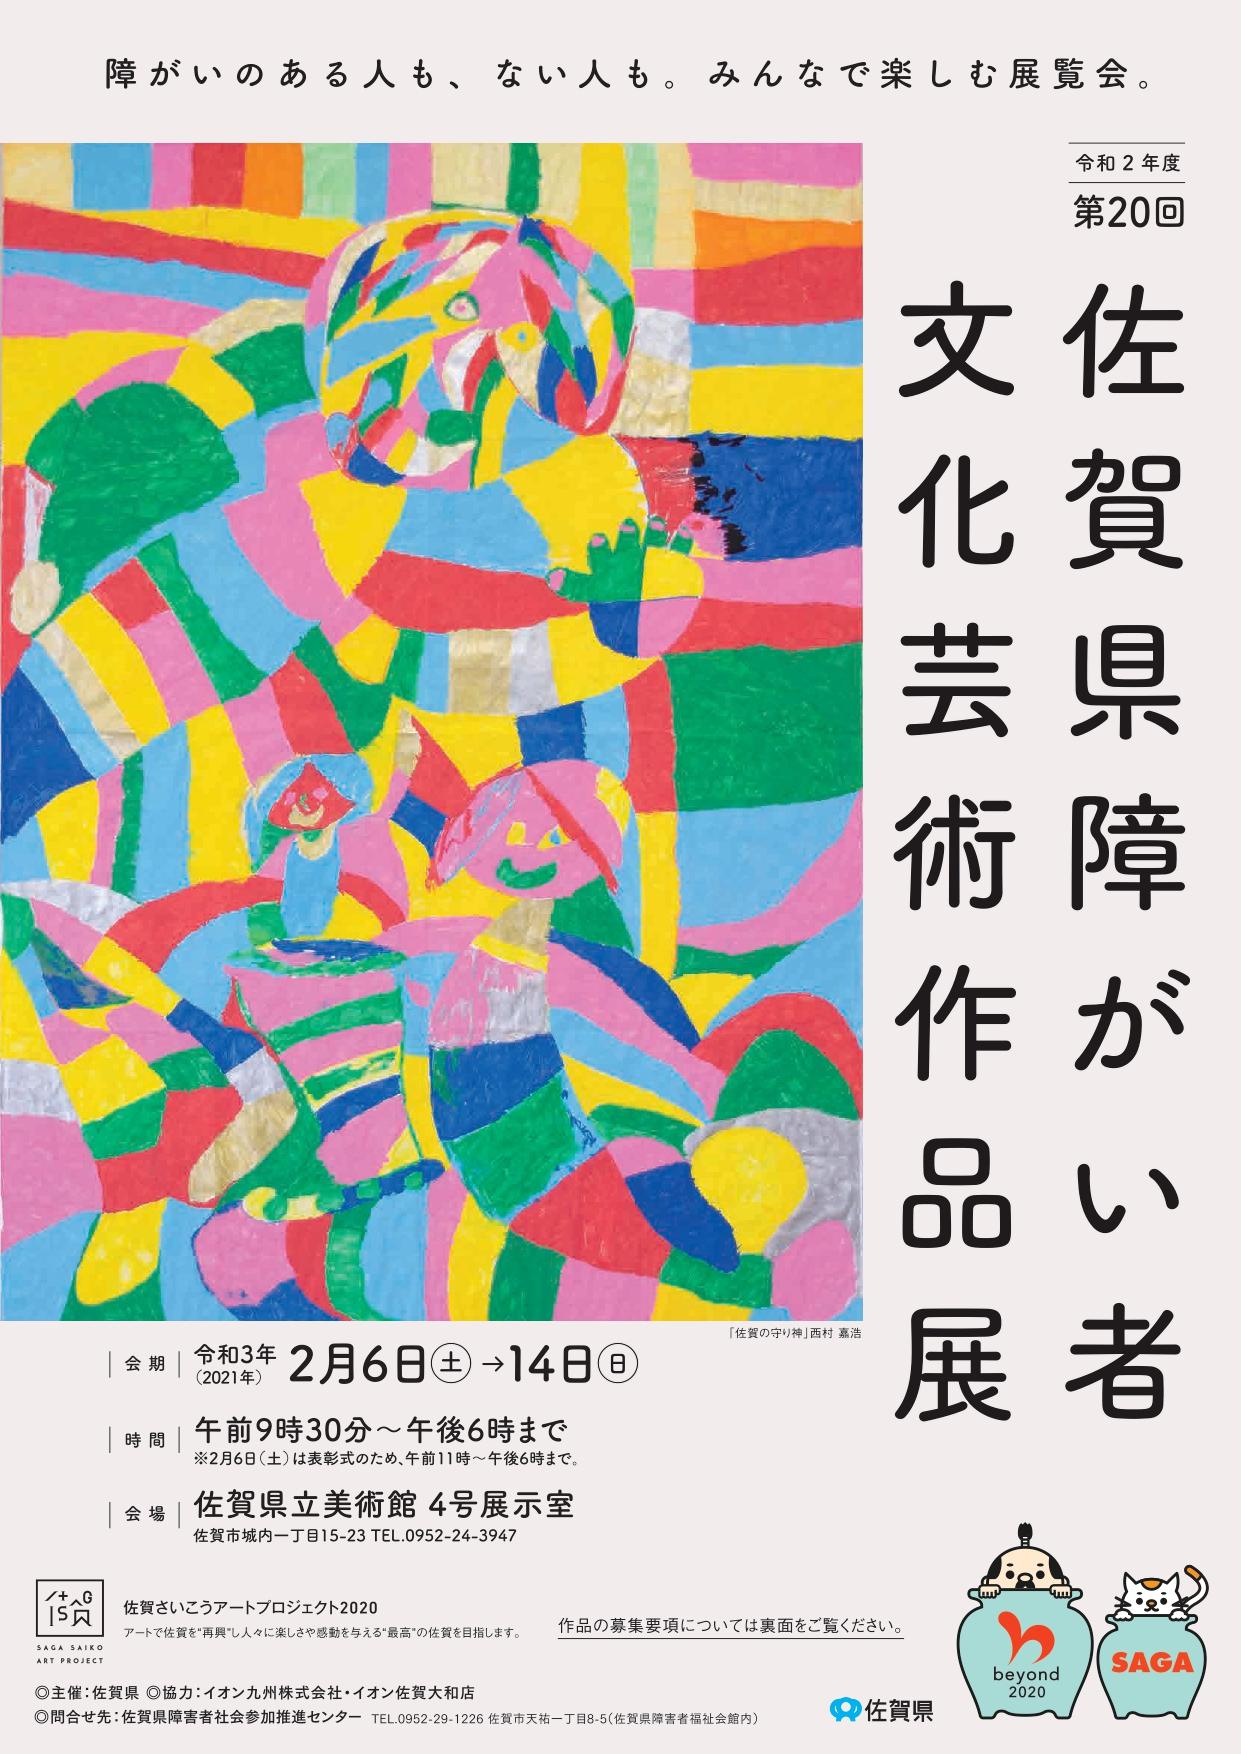 https://saga-museum.jp/museum/exhibition/limited/dffe18455ef925a22aa7e8a4b1aac3ef.jpg